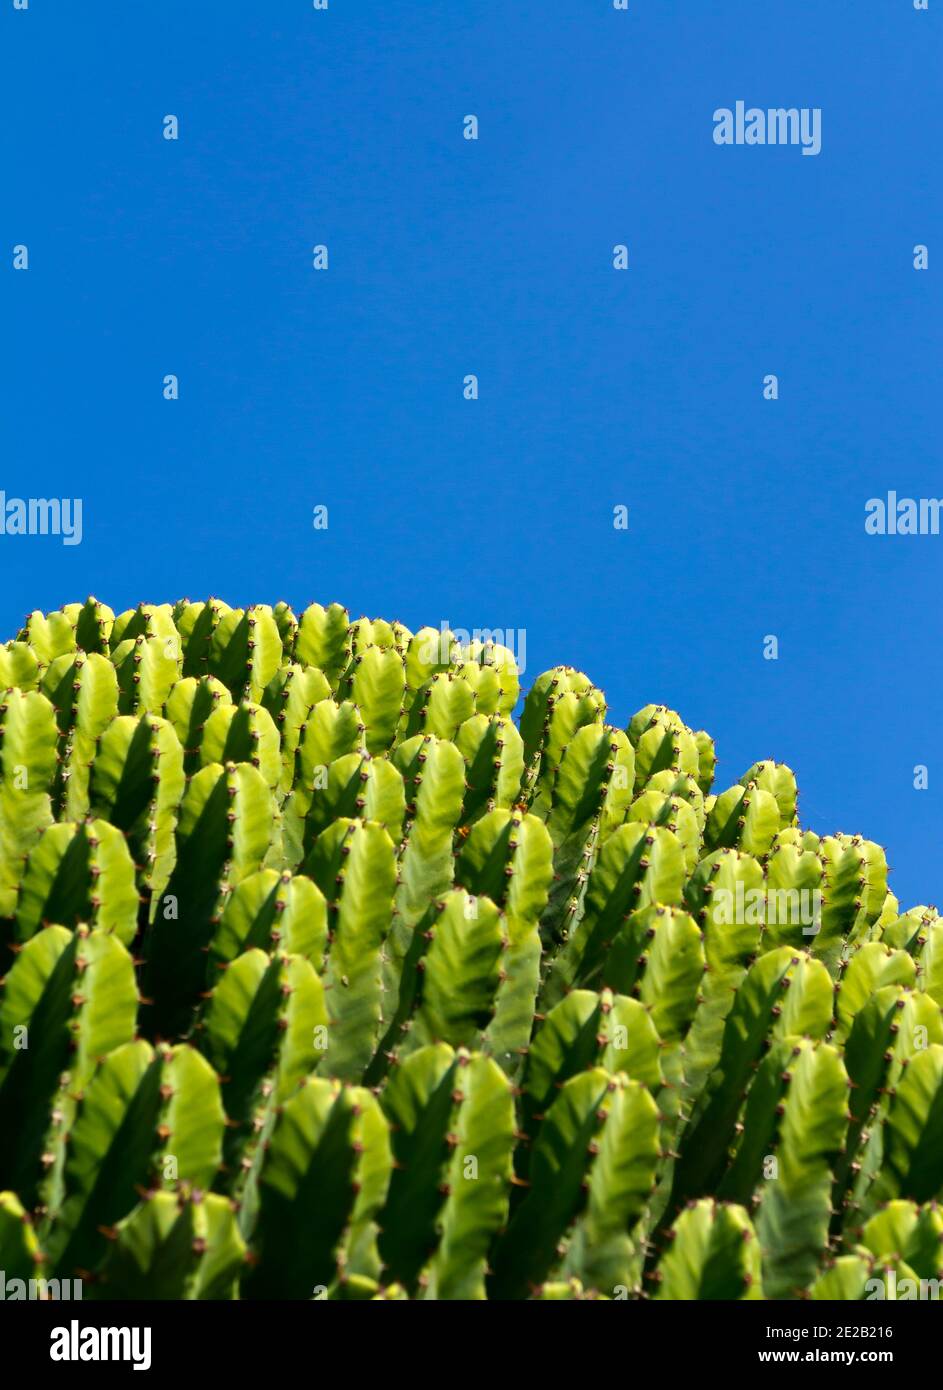 Close up view of cactus plant growing in a sub tropical garden. Stock Photo